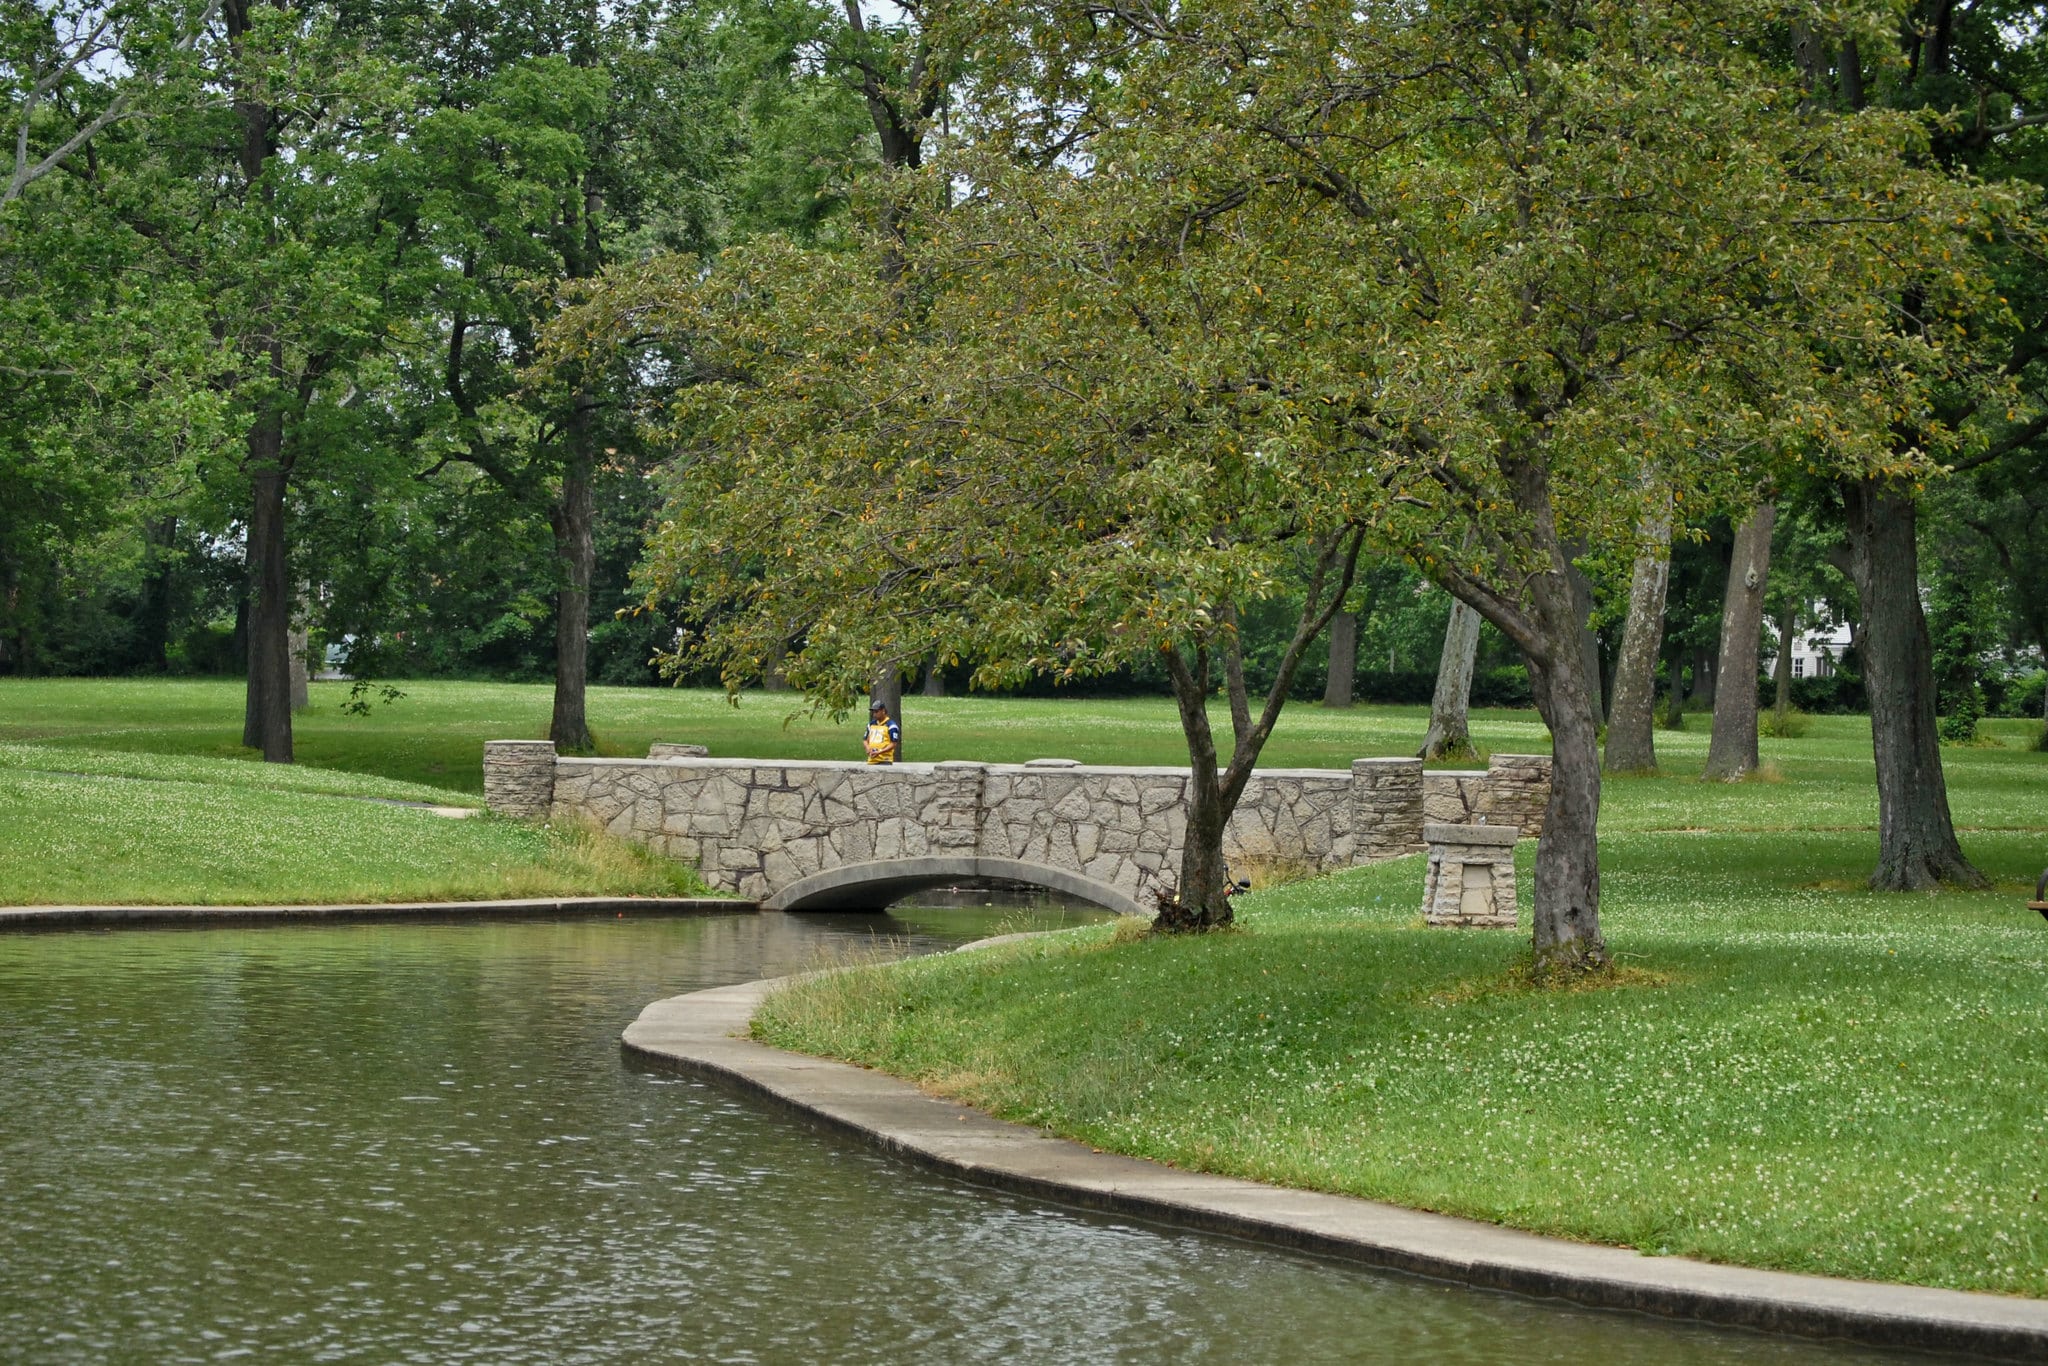 horizontal photo showing a bridge over a river at faurot park, lima ohio, with grass and trees either side of the river